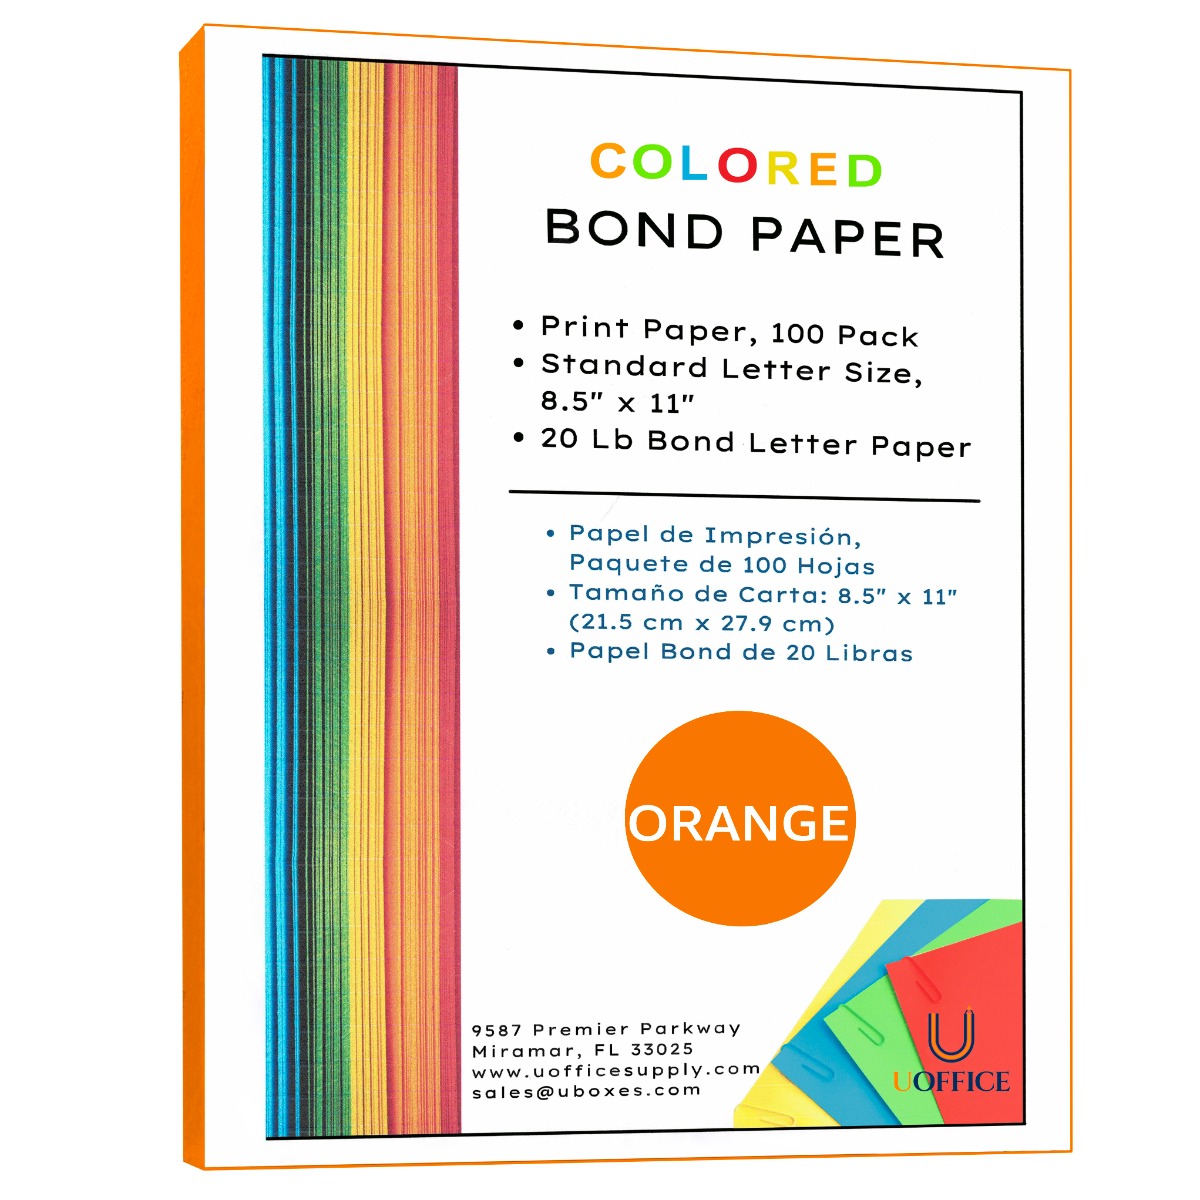 Uoffice Colored Bond Paper Bundle 8.5 inch x 11 inch, 20lbs, 100 Pages, Orange